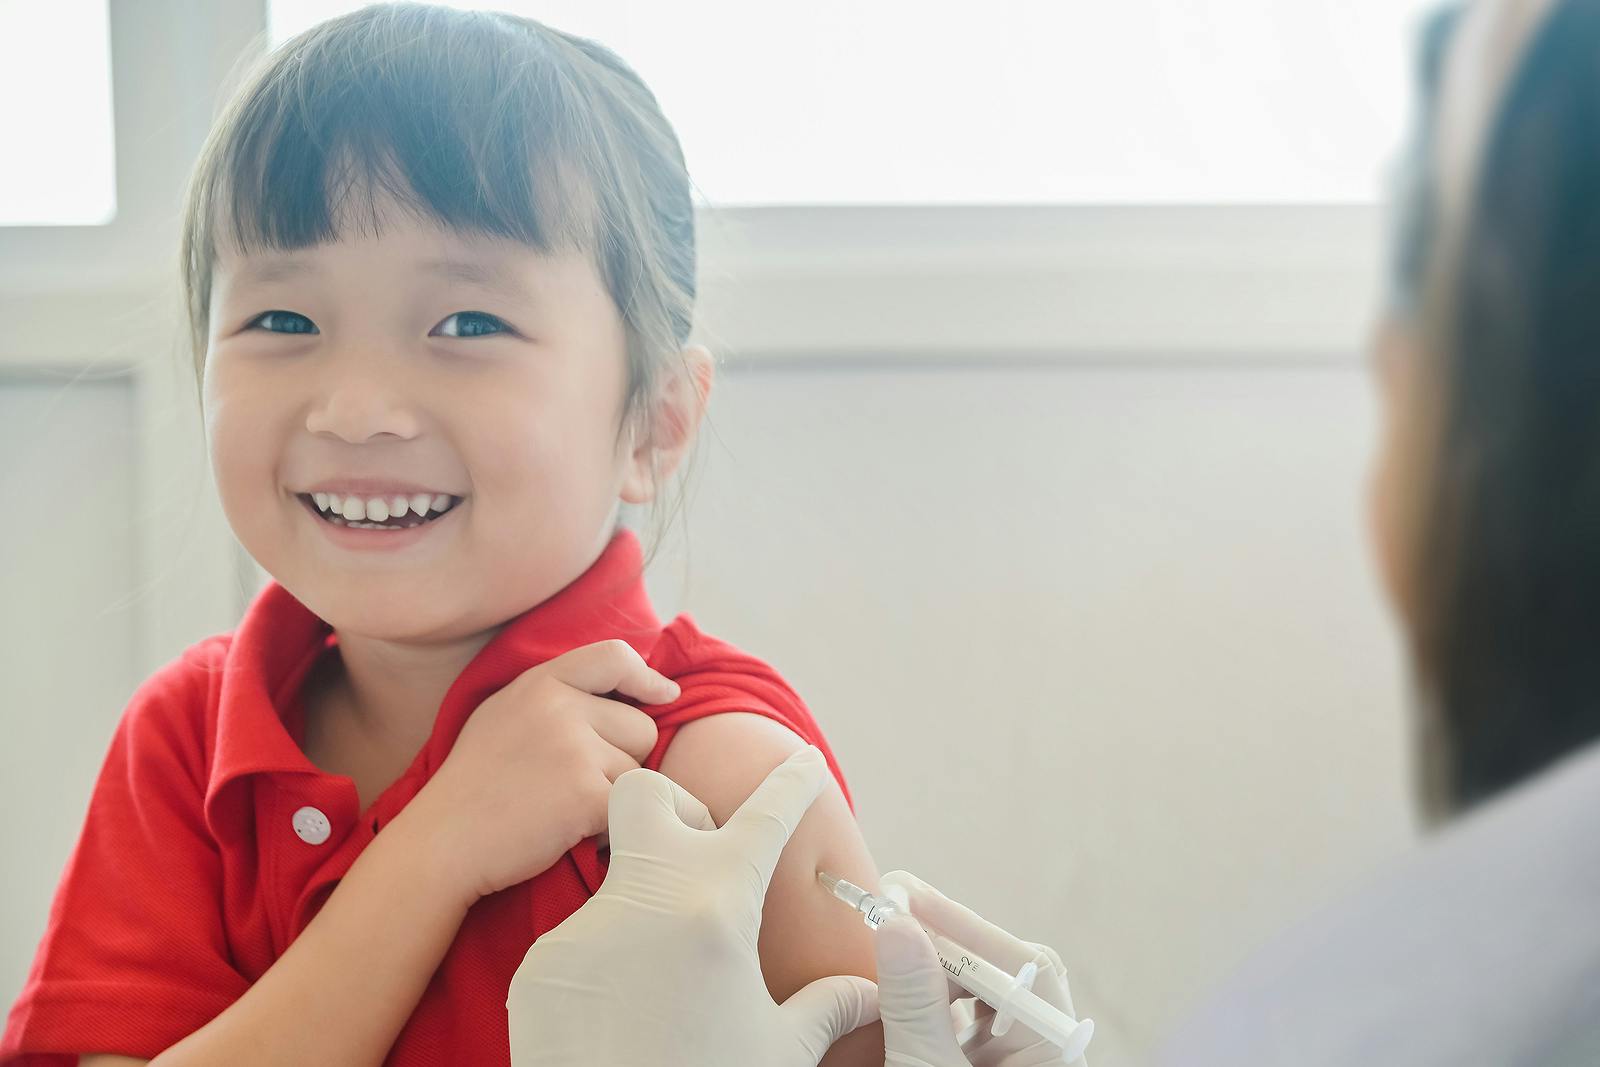 Asian Little child having Injection, Close-up Doctor injecting vaccination to arm of little girl her smile face and looking camera , vaccine injection for immunization health and medical concept
